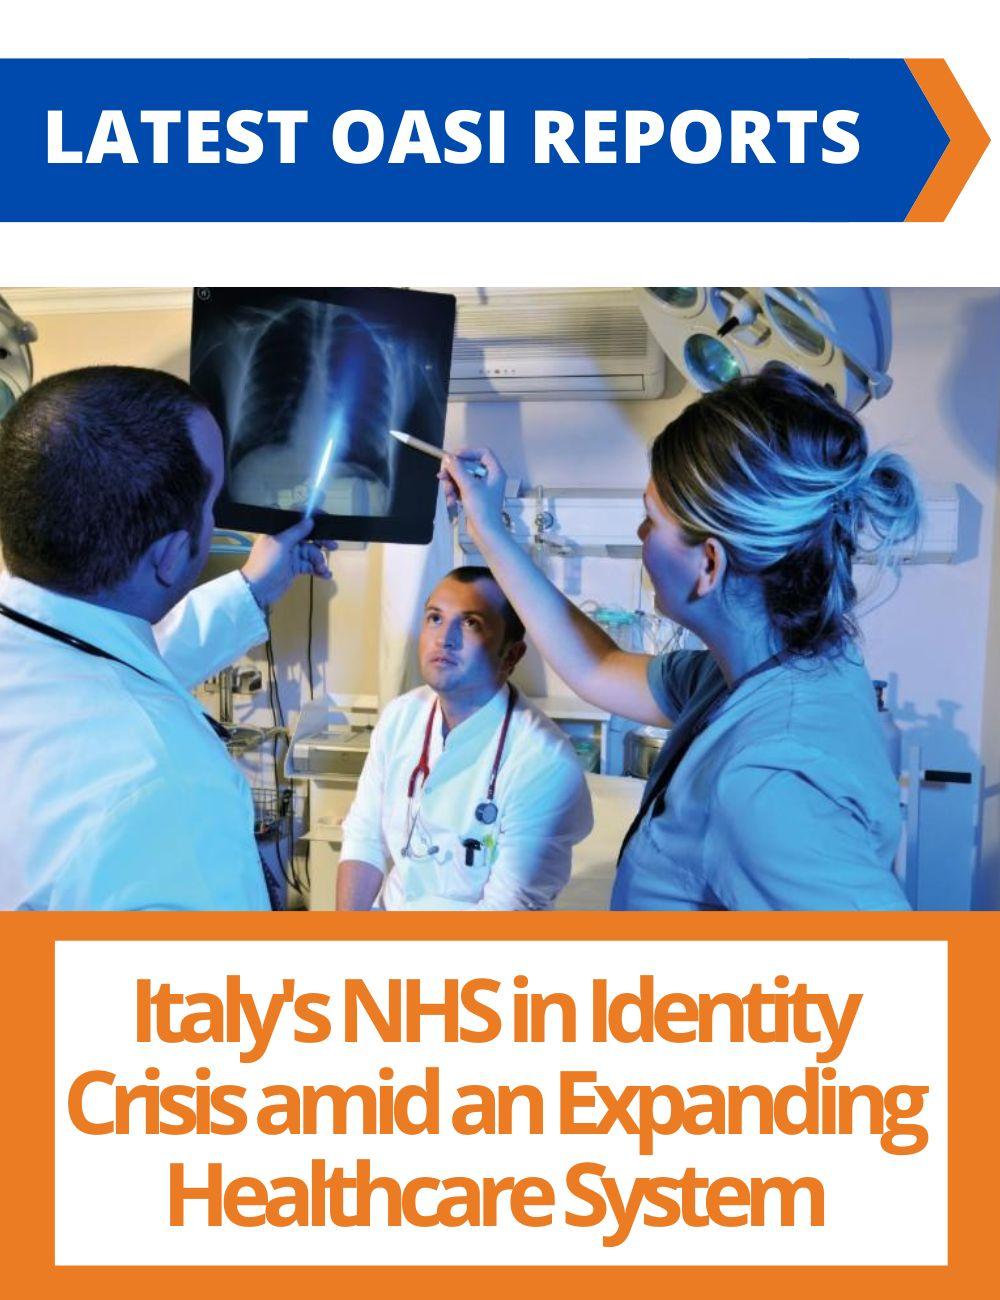 Link to related stories. Image: doctors looking at an x-ray. Story headline: OASI Report: Italy's NHS in Identity Crisis amid an Expanding Healthcare System